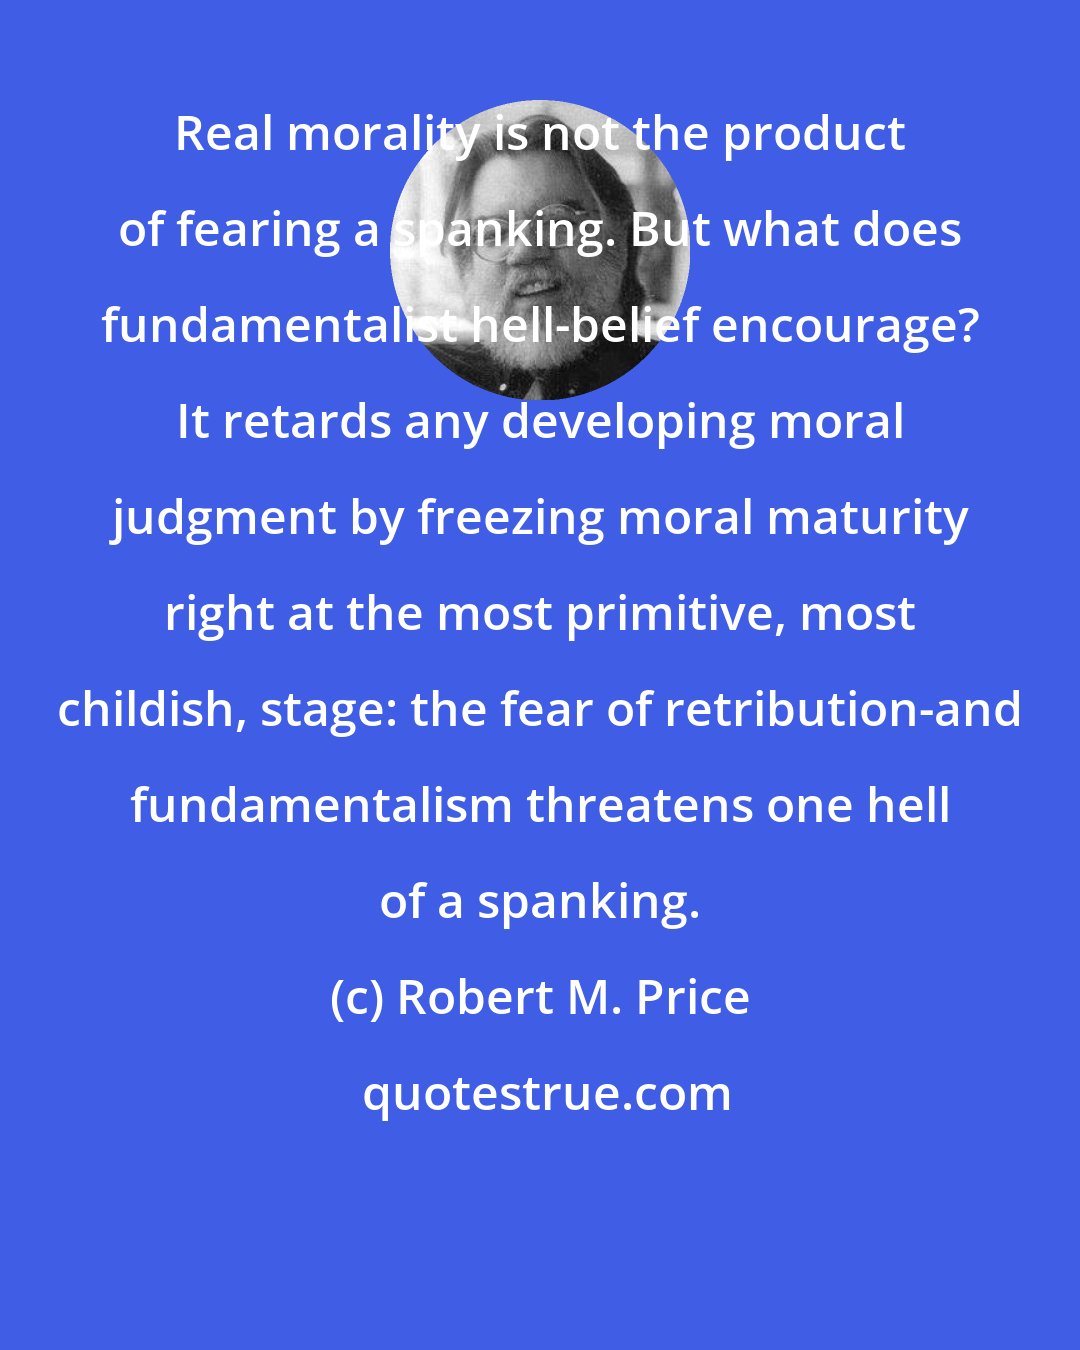 Robert M. Price: Real morality is not the product of fearing a spanking. But what does fundamentalist hell-belief encourage? It retards any developing moral judgment by freezing moral maturity right at the most primitive, most childish, stage: the fear of retribution-and fundamentalism threatens one hell of a spanking.